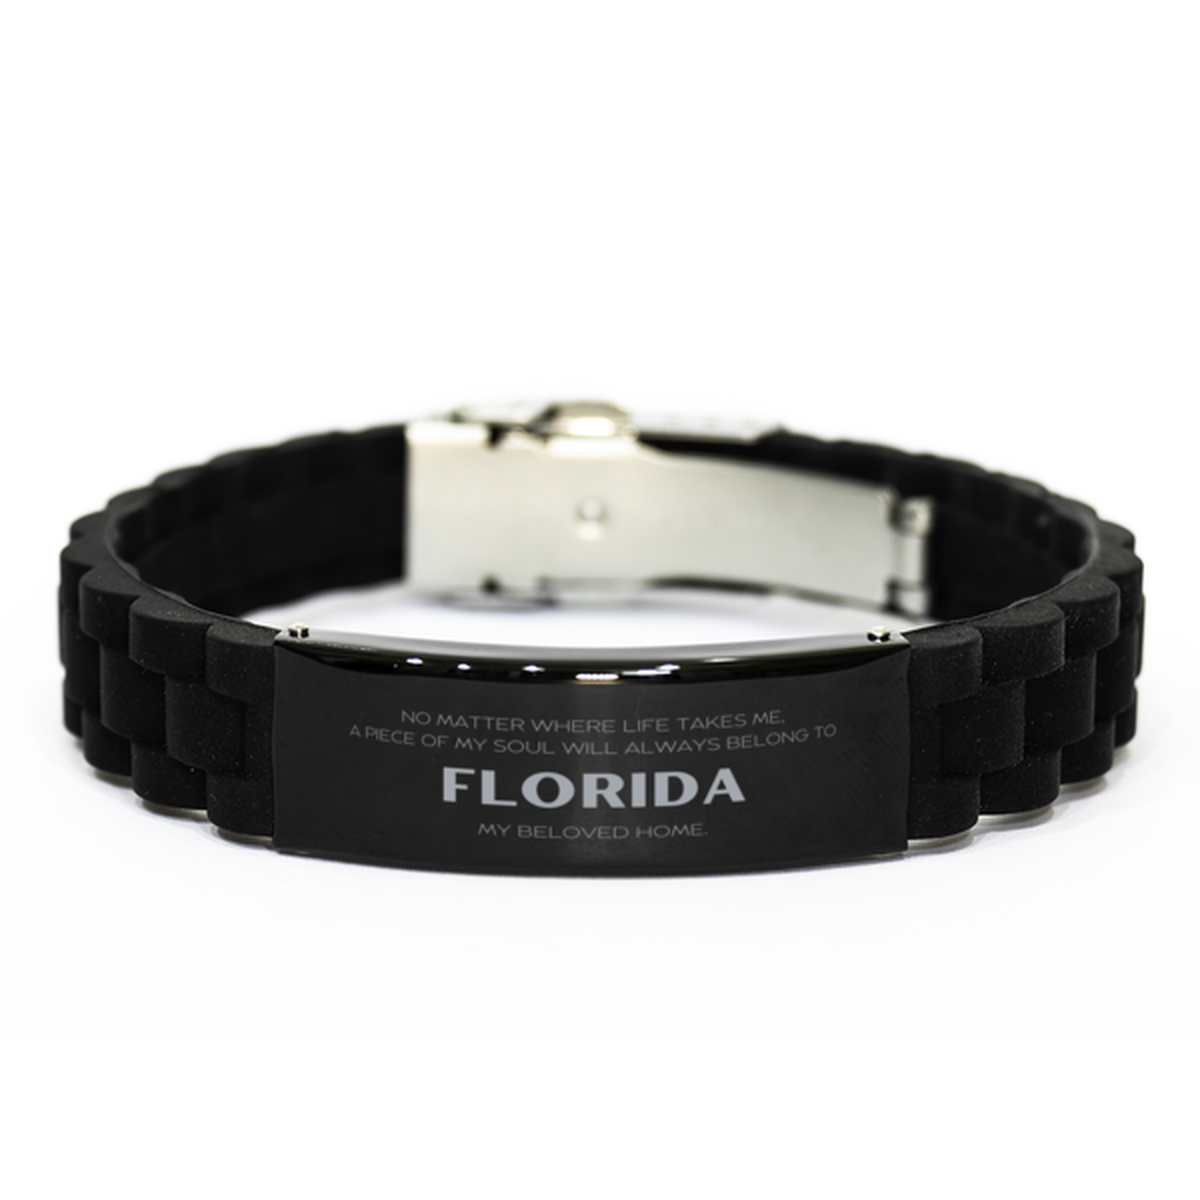 Love Florida State Gifts, My soul will always belong to Florida, Proud Black Glidelock Clasp Bracelet, Birthday Unique Gifts For Florida Men, Women, Friends